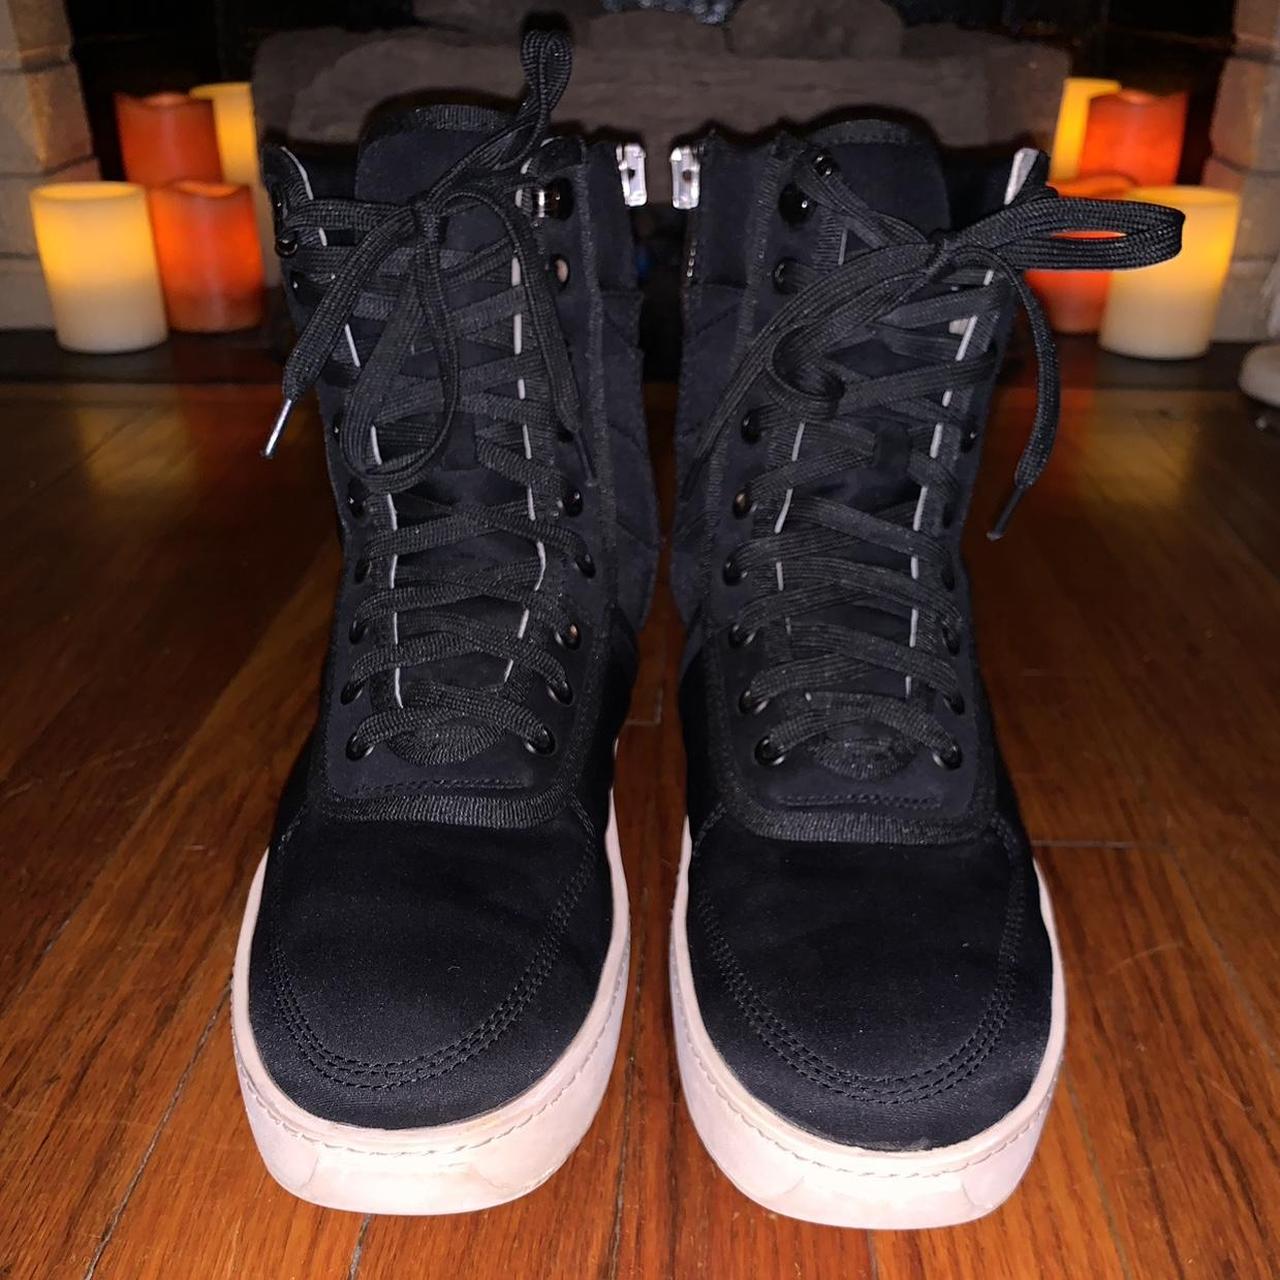 Fear of God Men's Black and White Trainers (3)